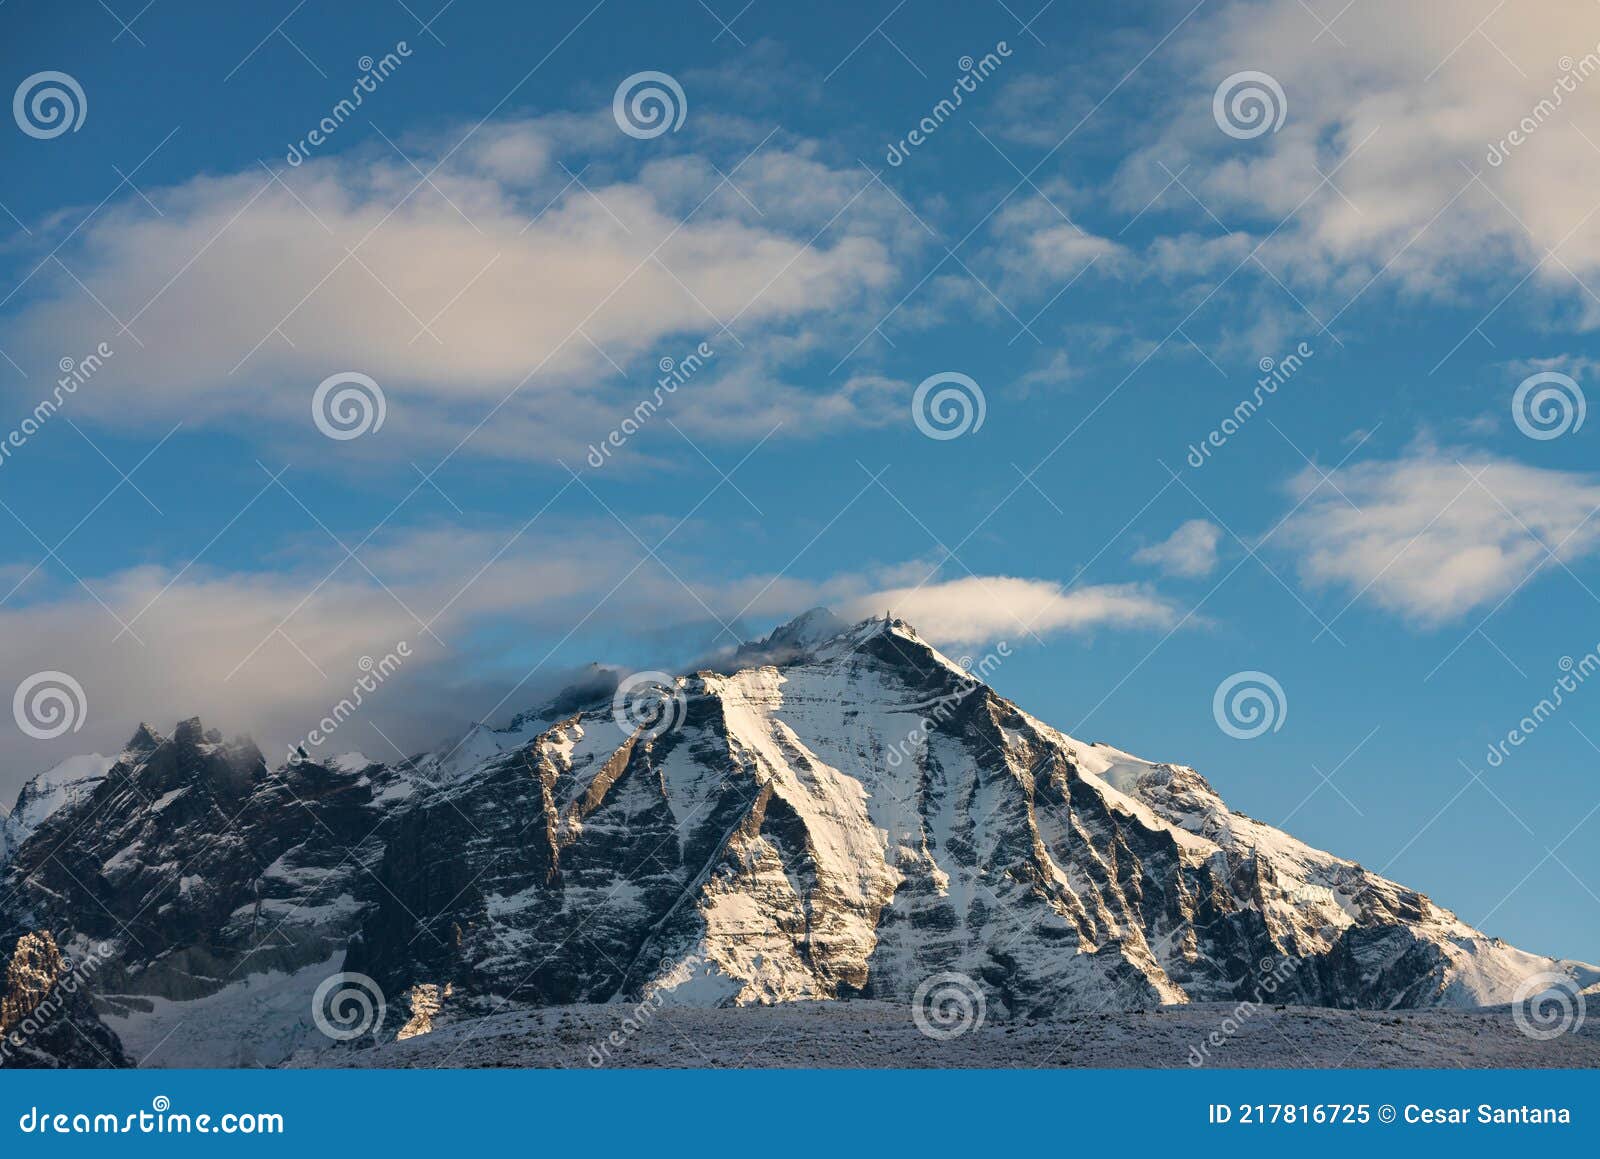 snow covered almirante nieto mountain with clouds passing over the peak